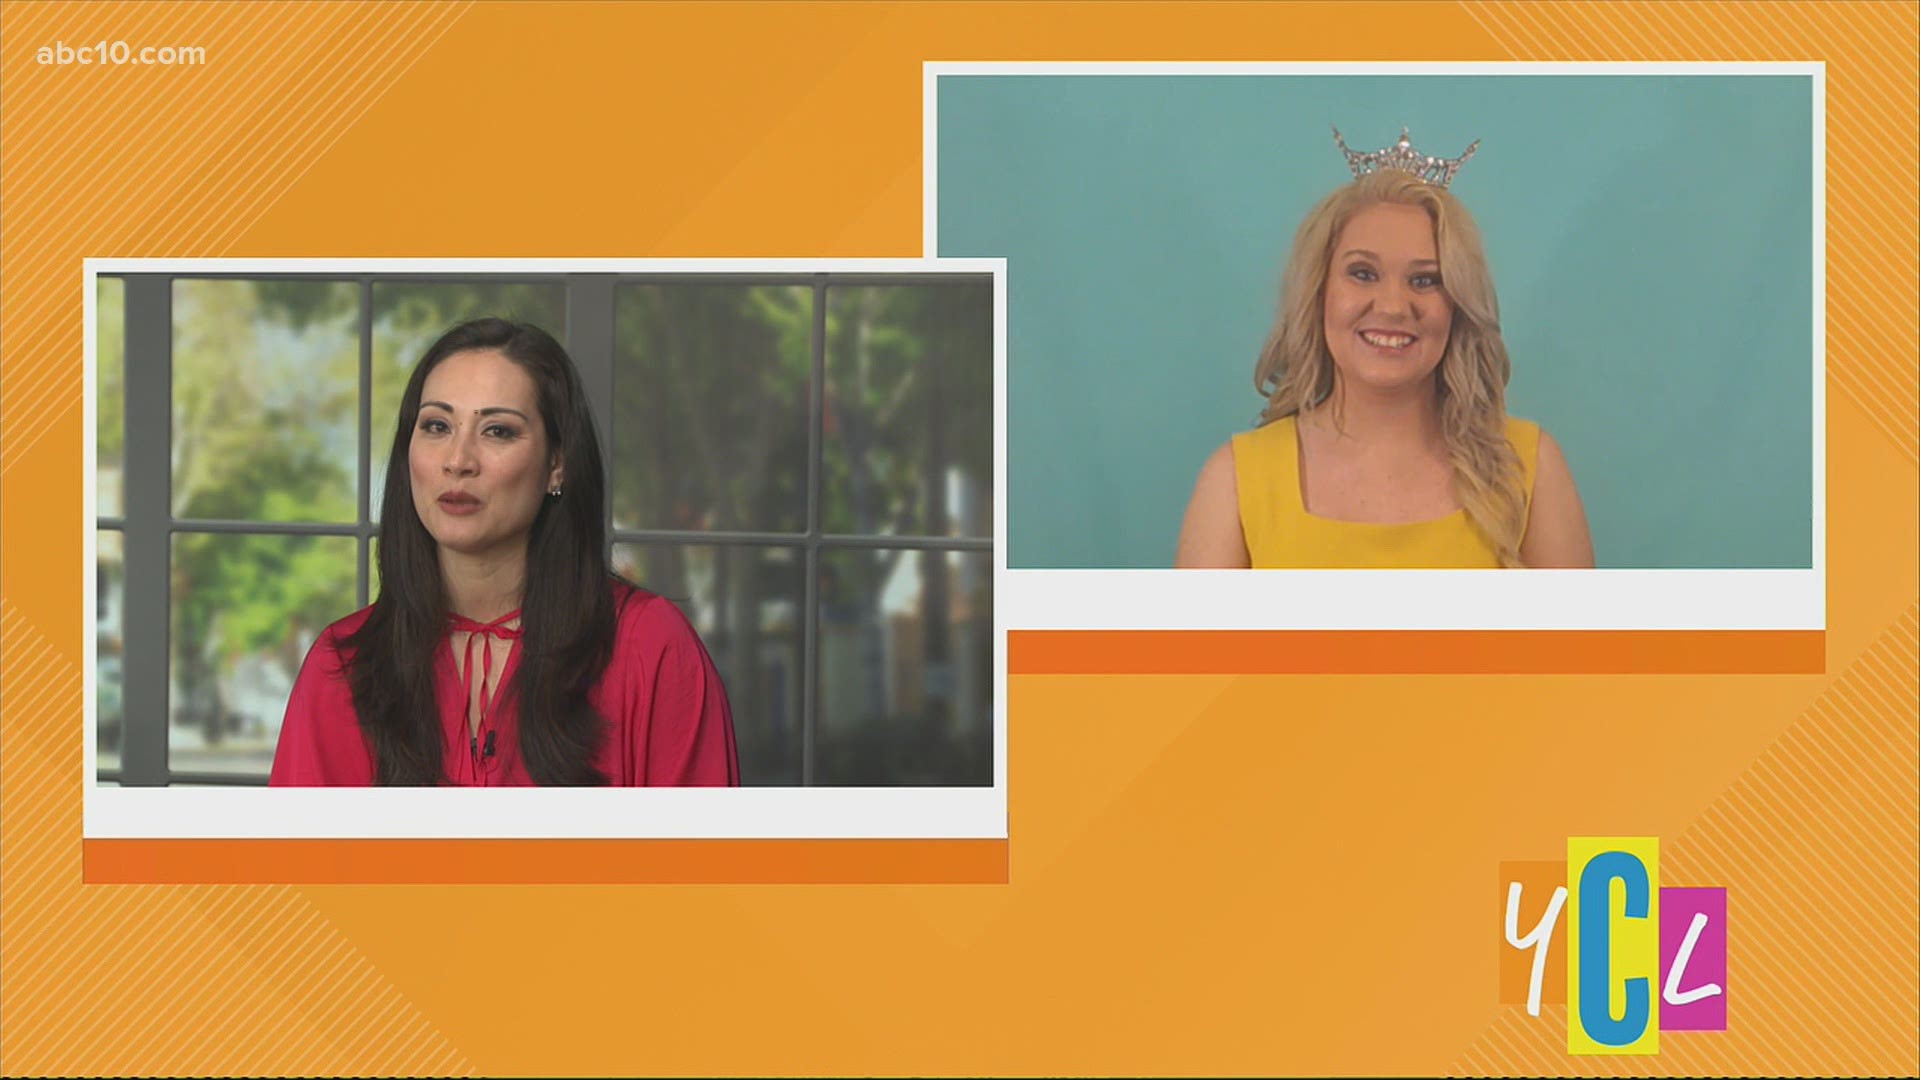 Miss San Joaquin County, Emily Grimmius, tells us about her "Read, Dream, Succeed:" initiative to improve child literacy and her partnership with 916 Ink.